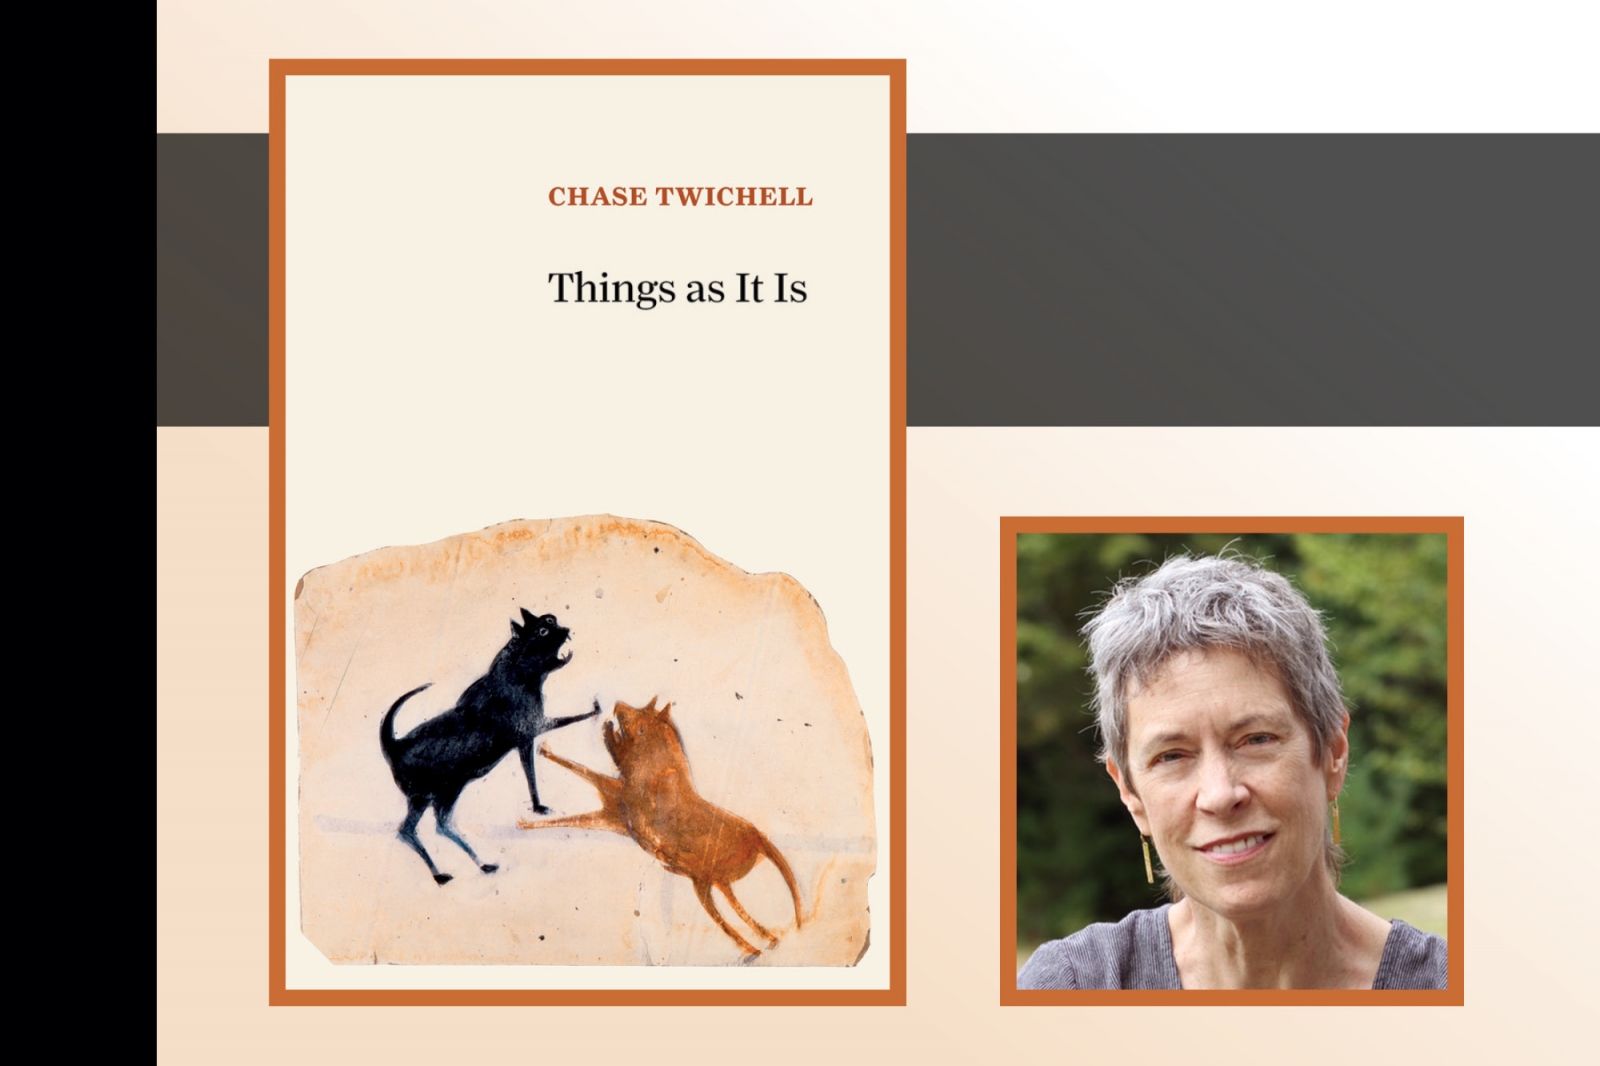 Poet Chase Twitchell juxtaposed with the cover to her book, Things As It Is